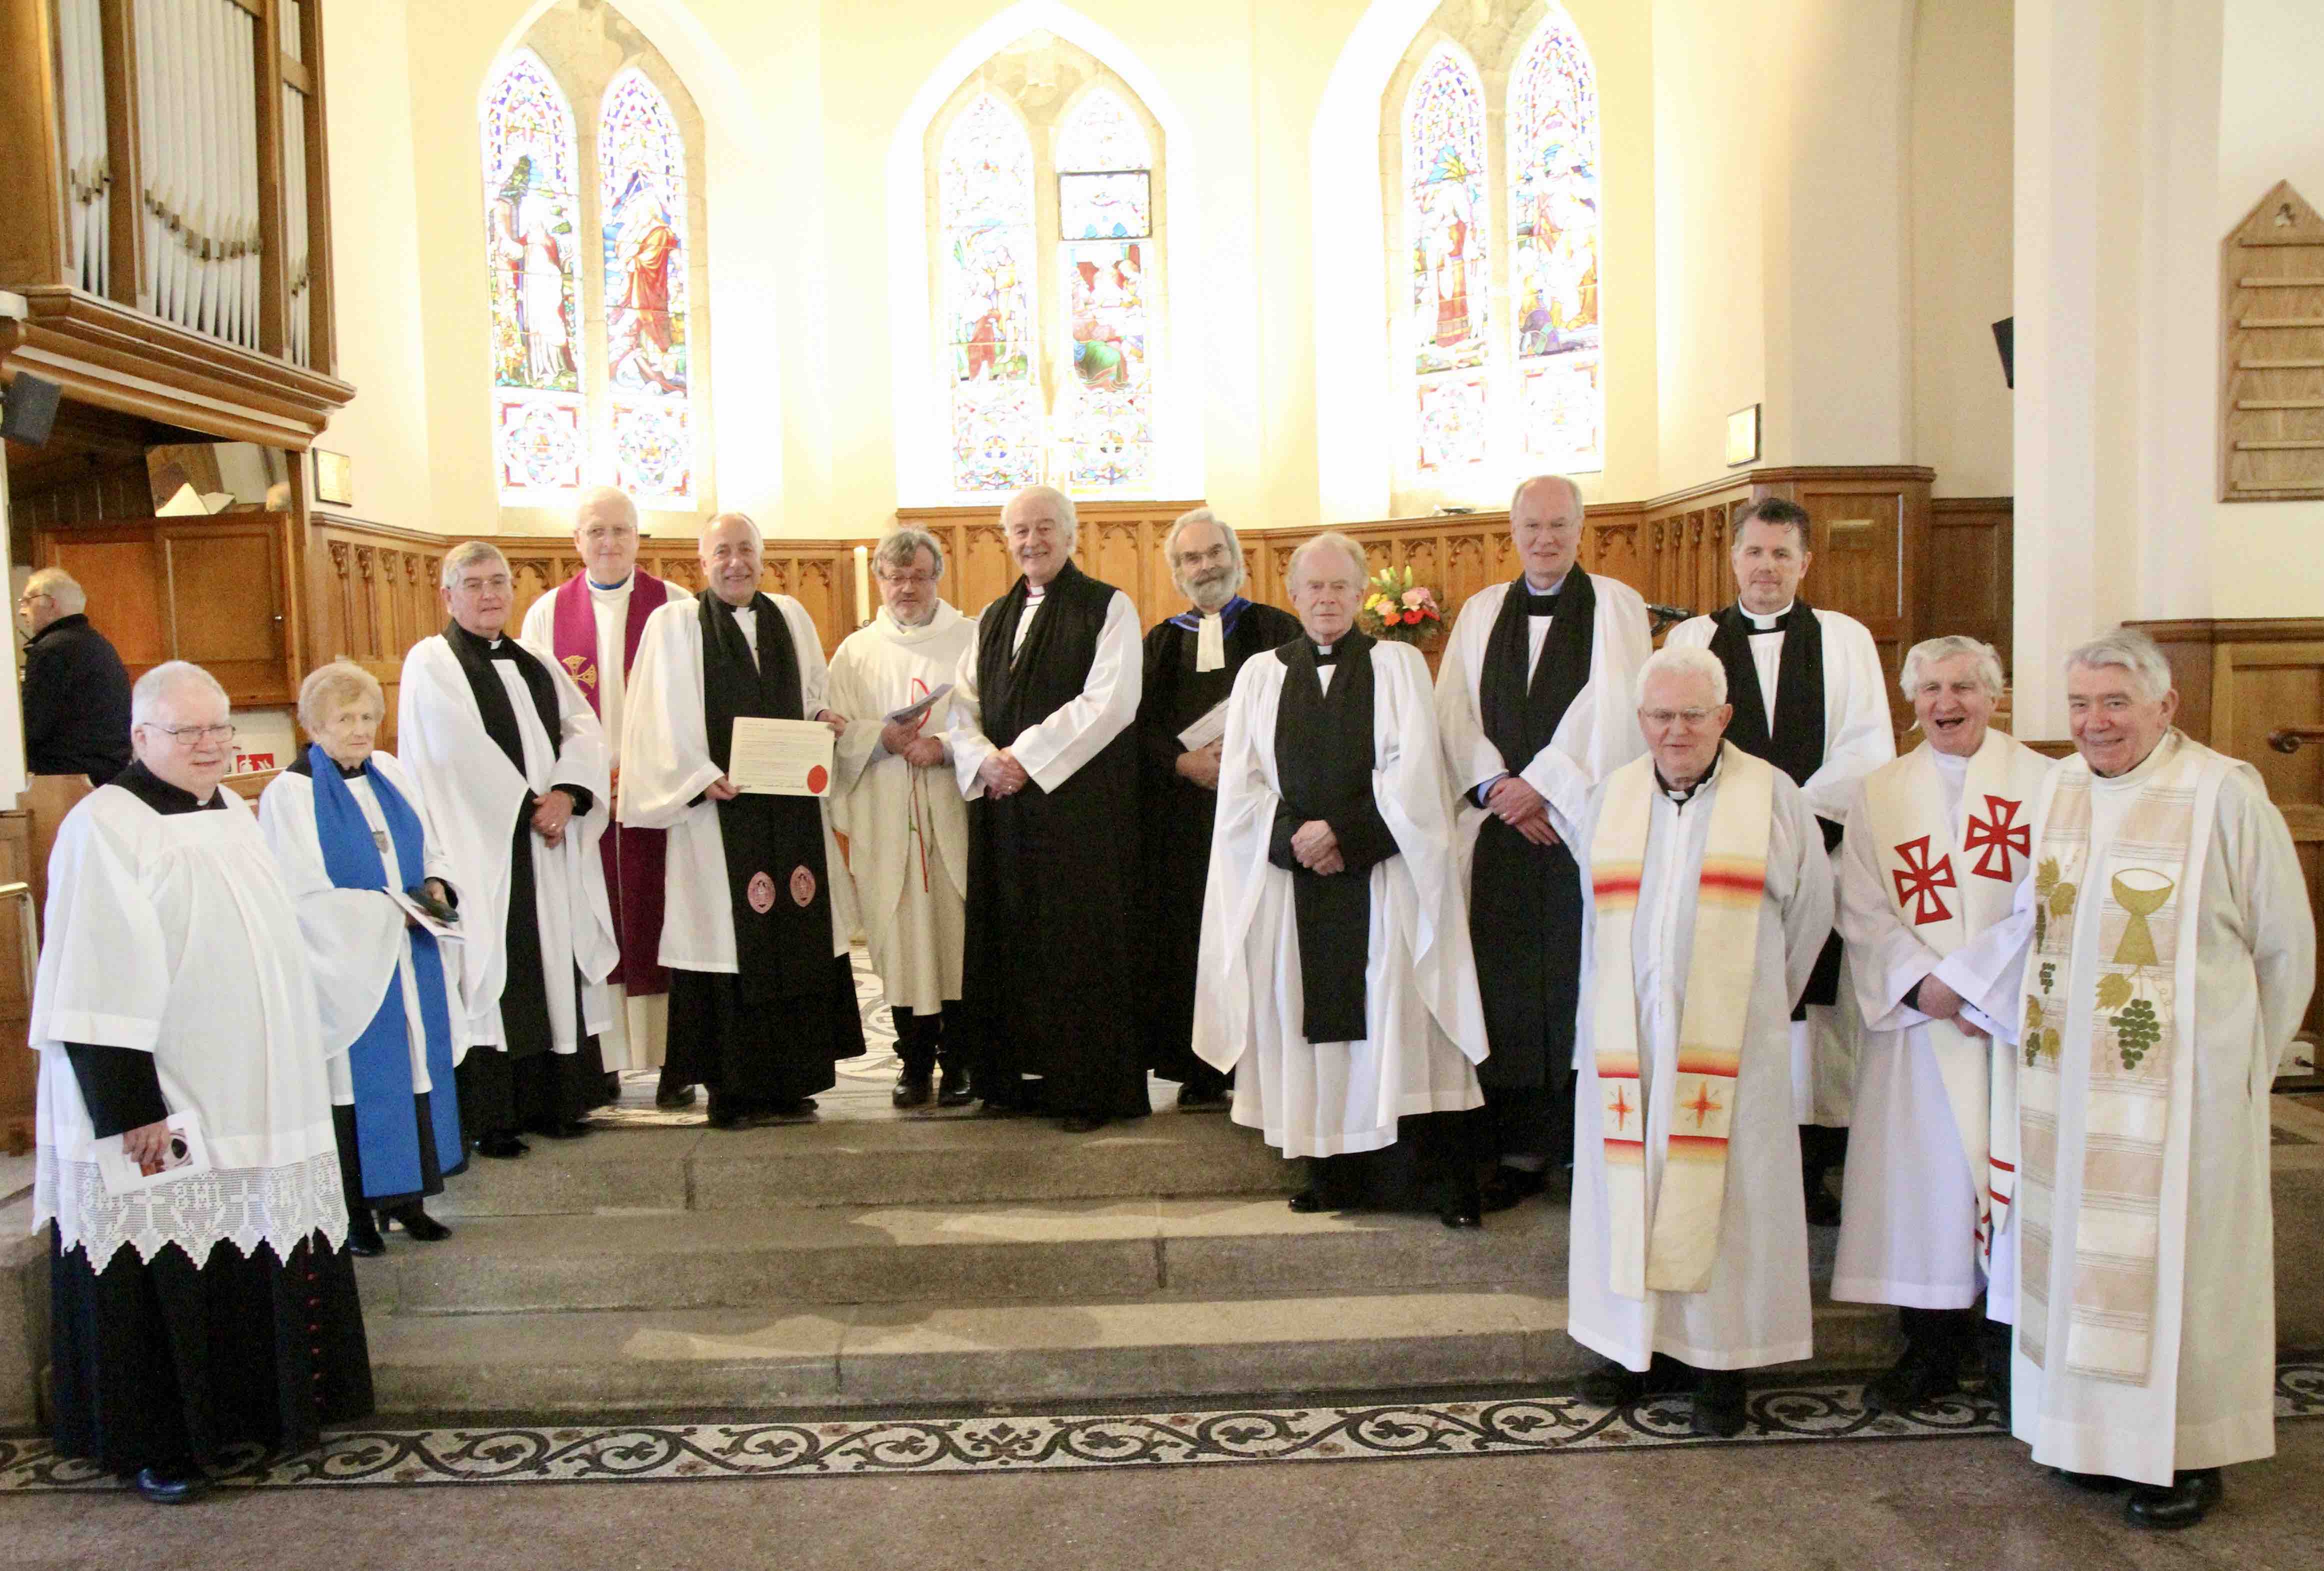 The clergy who attended the rededication.